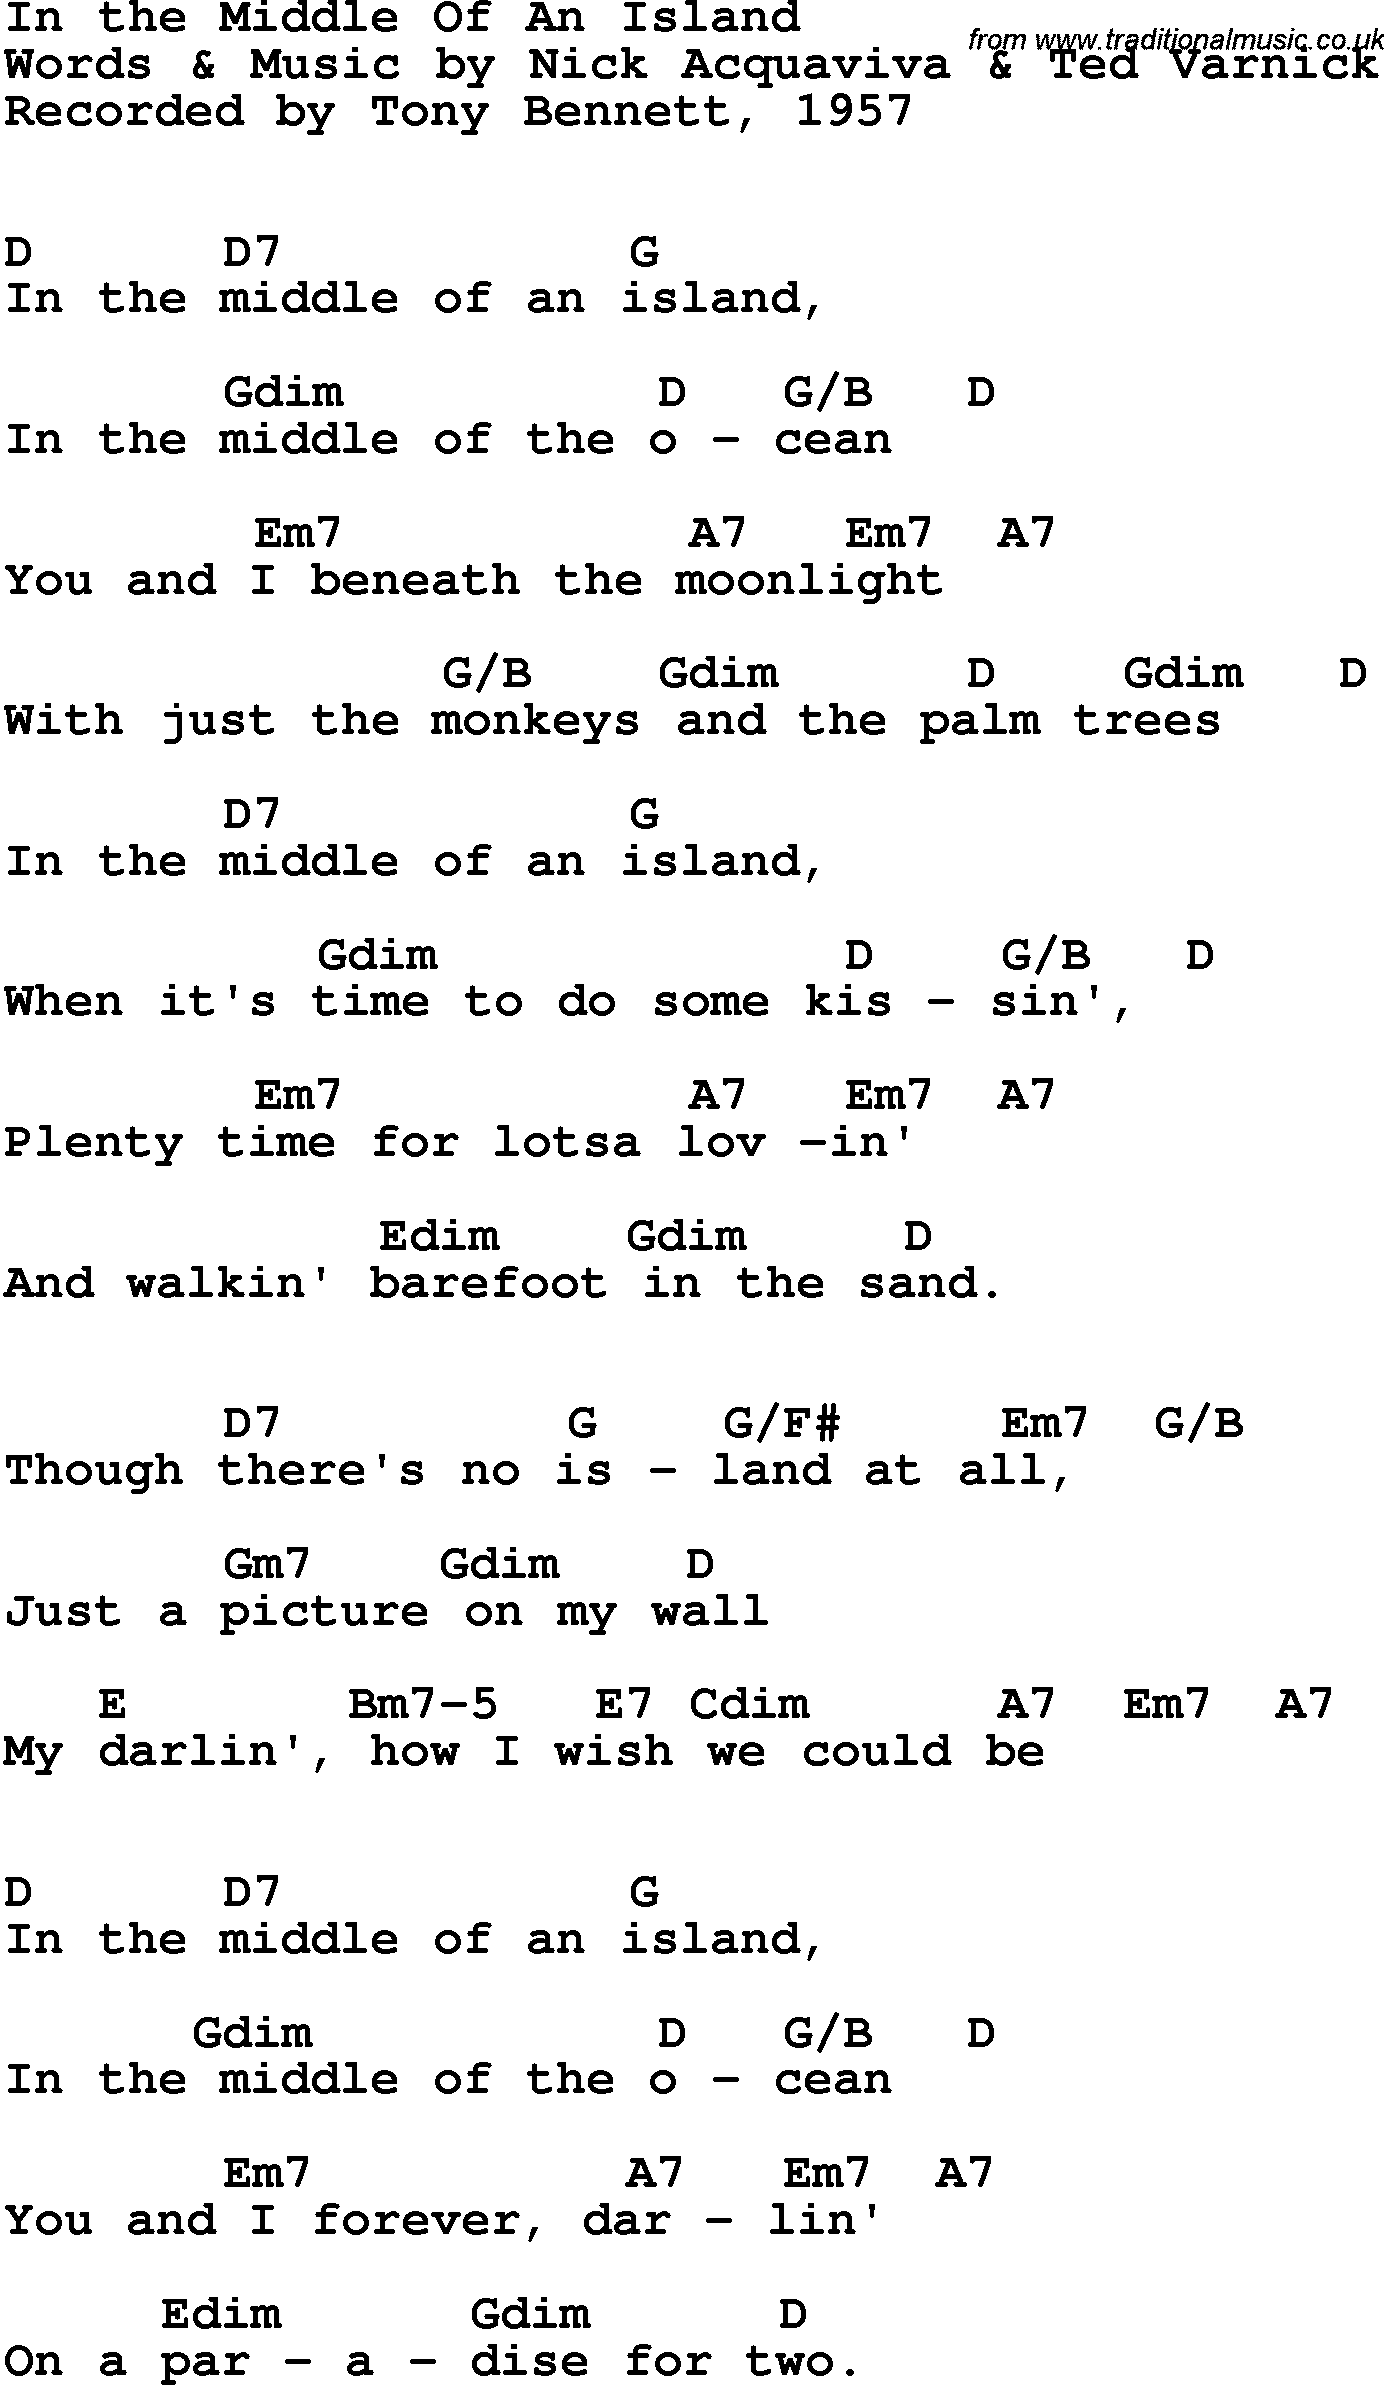 Song Lyrics with guitar chords for In The Middle Of An Island - Tony Bennett, 1957